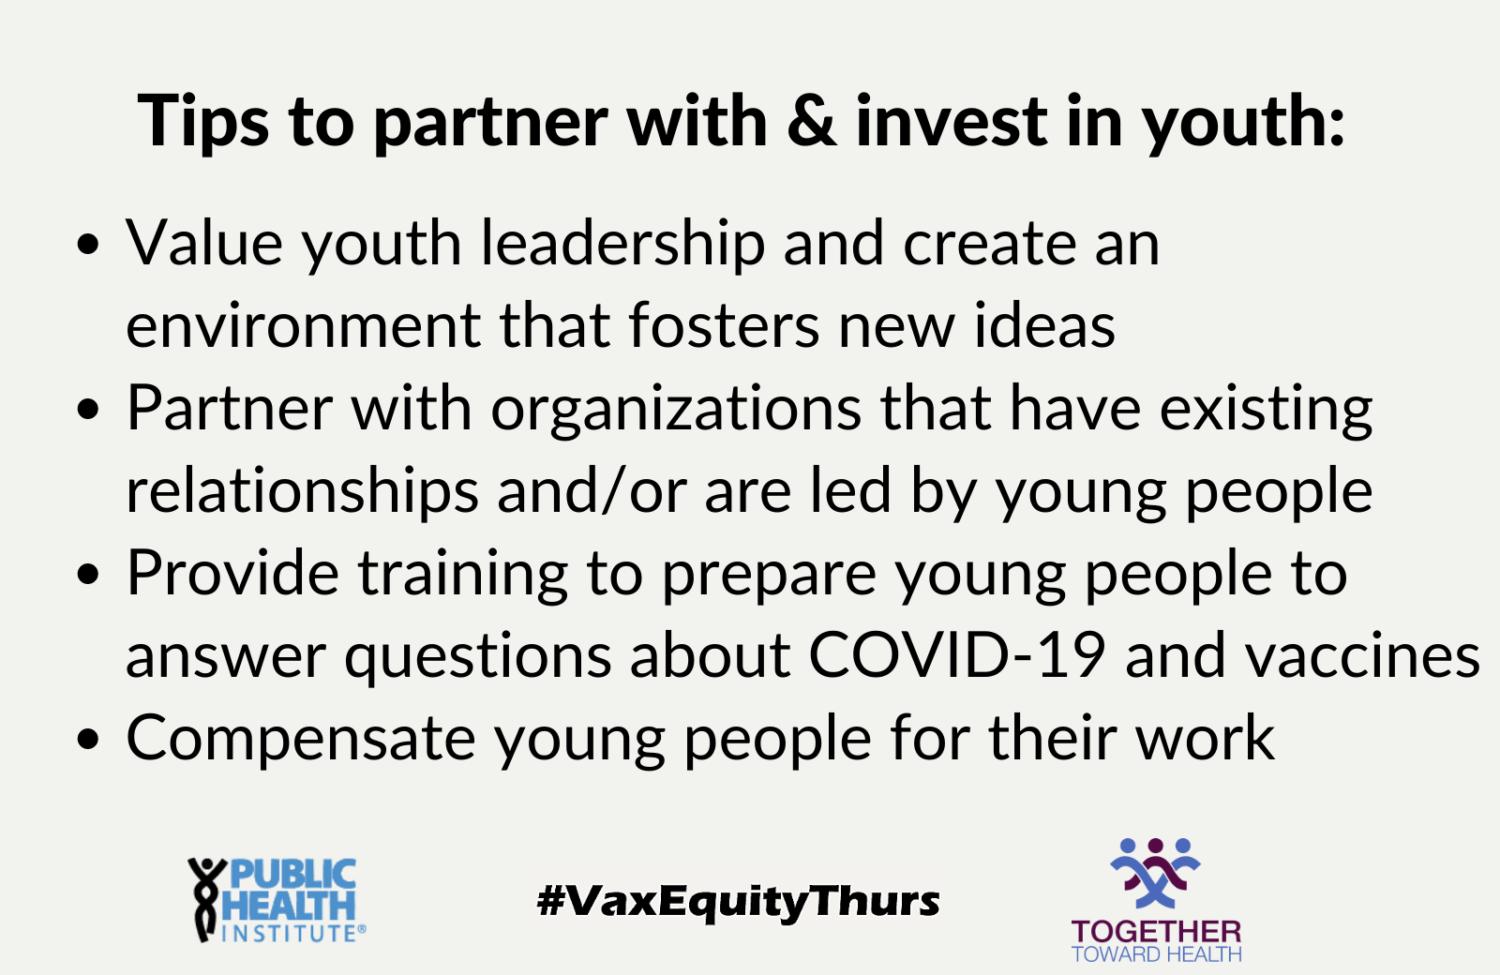 Tips to partner with and invest in youth: Value youth leadership and create an environment that fosters new ideas Partner with organizations that have existing relationships and/or are led by young people Provide training to prepare young people to answer questions about COVID-19 and vaccines Compensate young people for their work